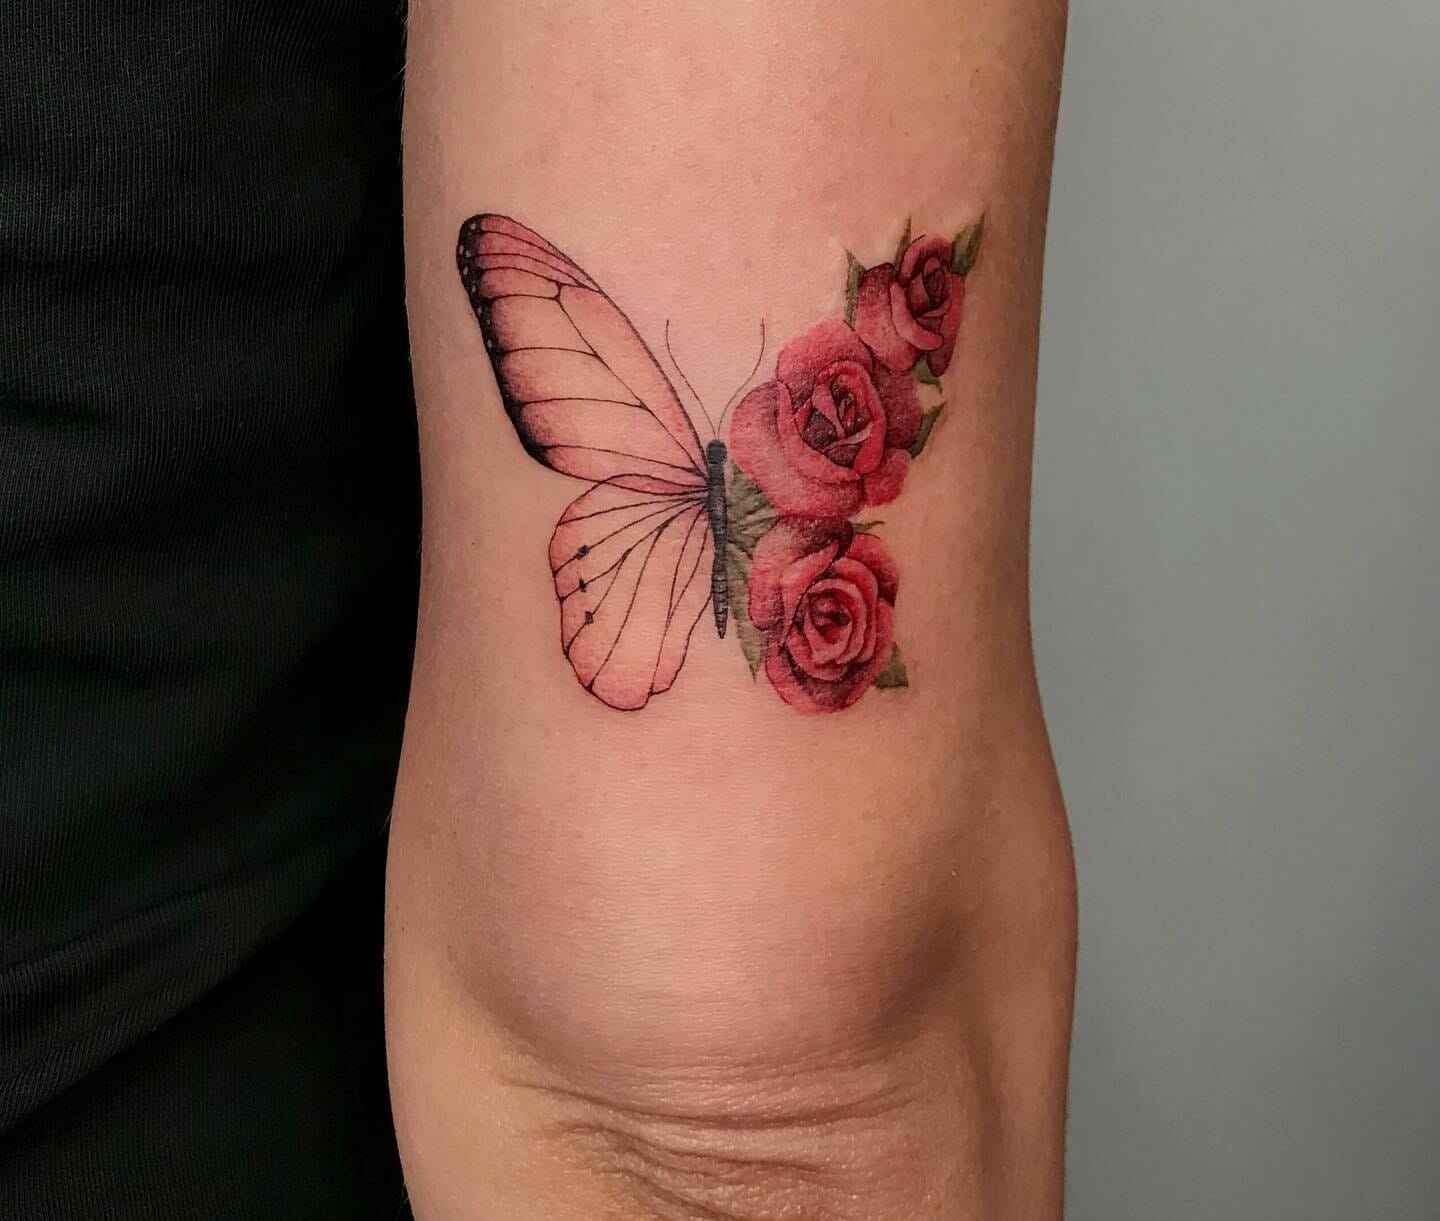 Pride N Envy Tattoos on Twitter Majestic detailed butterfly with roses by  our amazing artist beeoncuhlazuli  Visit her Instagram to find all of  her tattoo designs and also send a DM